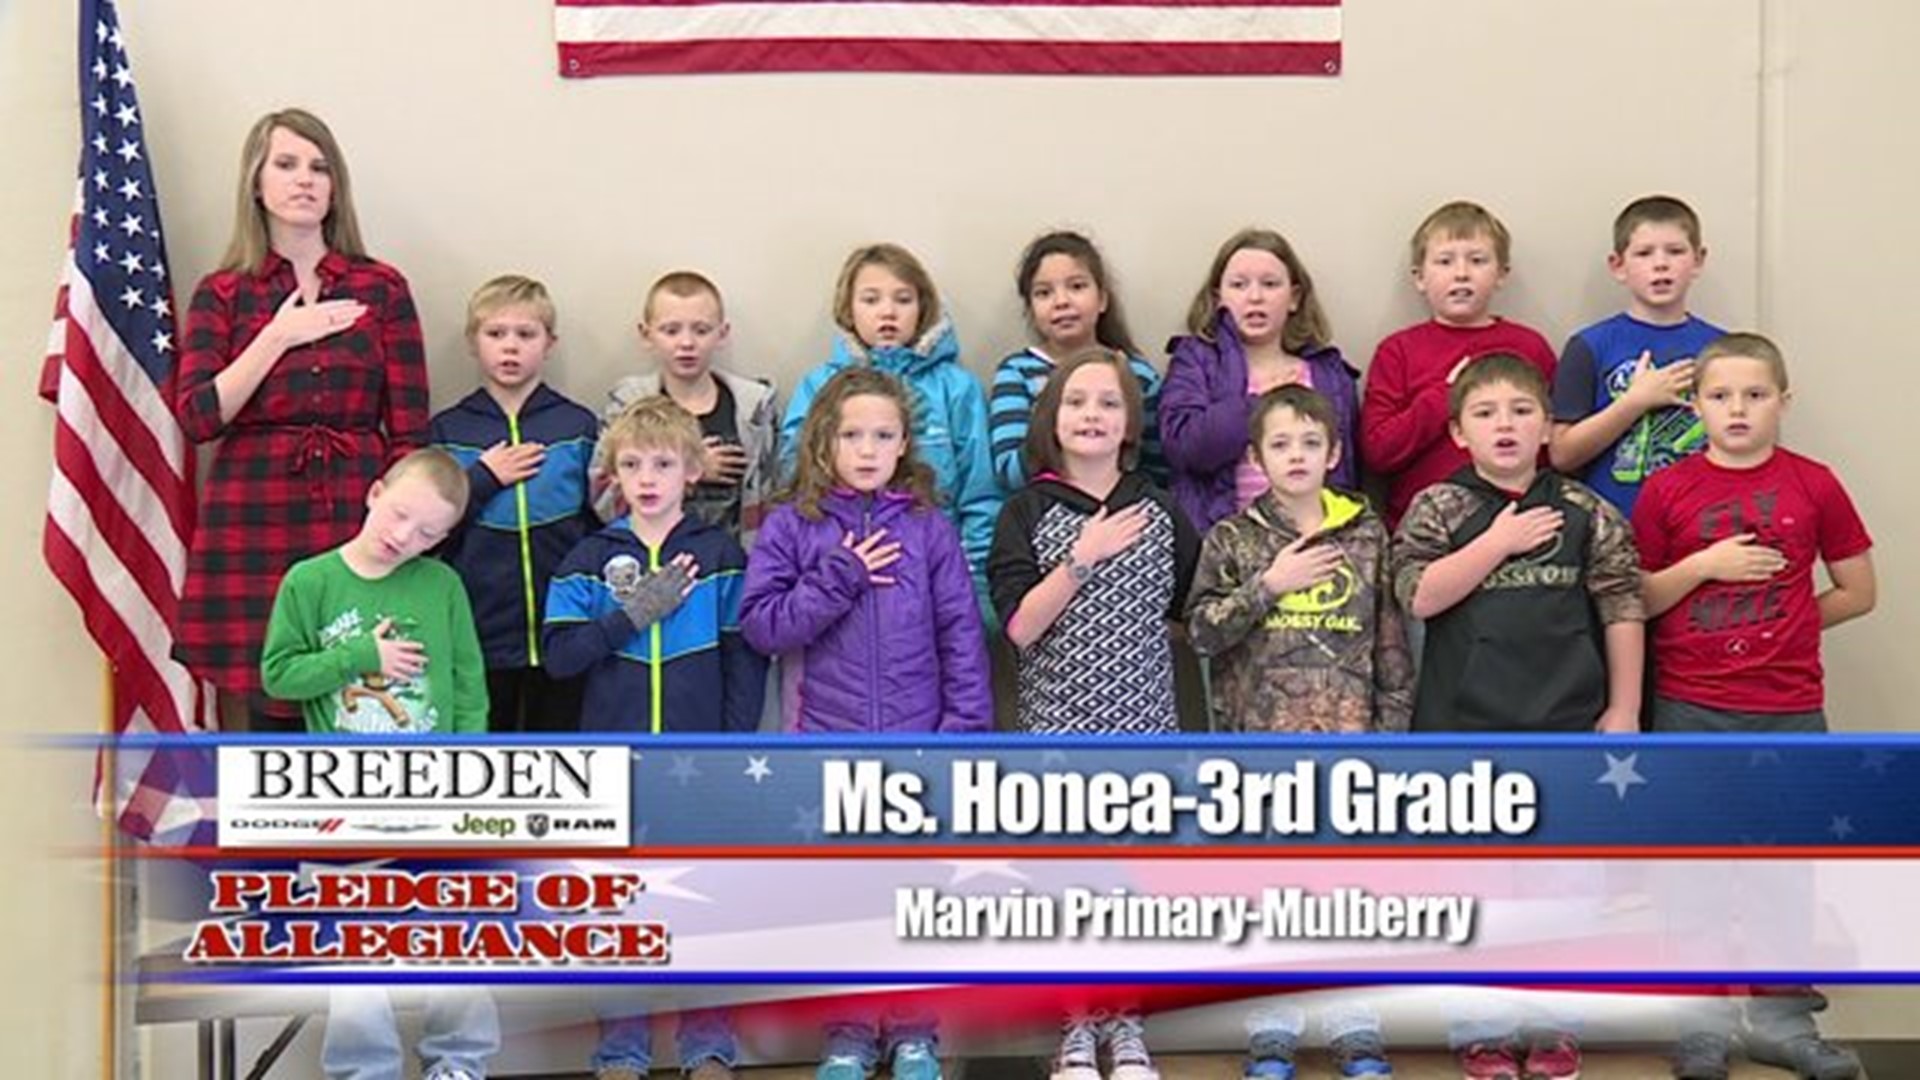 Marvin Primary, Mulberry - Ms. Honea - 3rd Grade